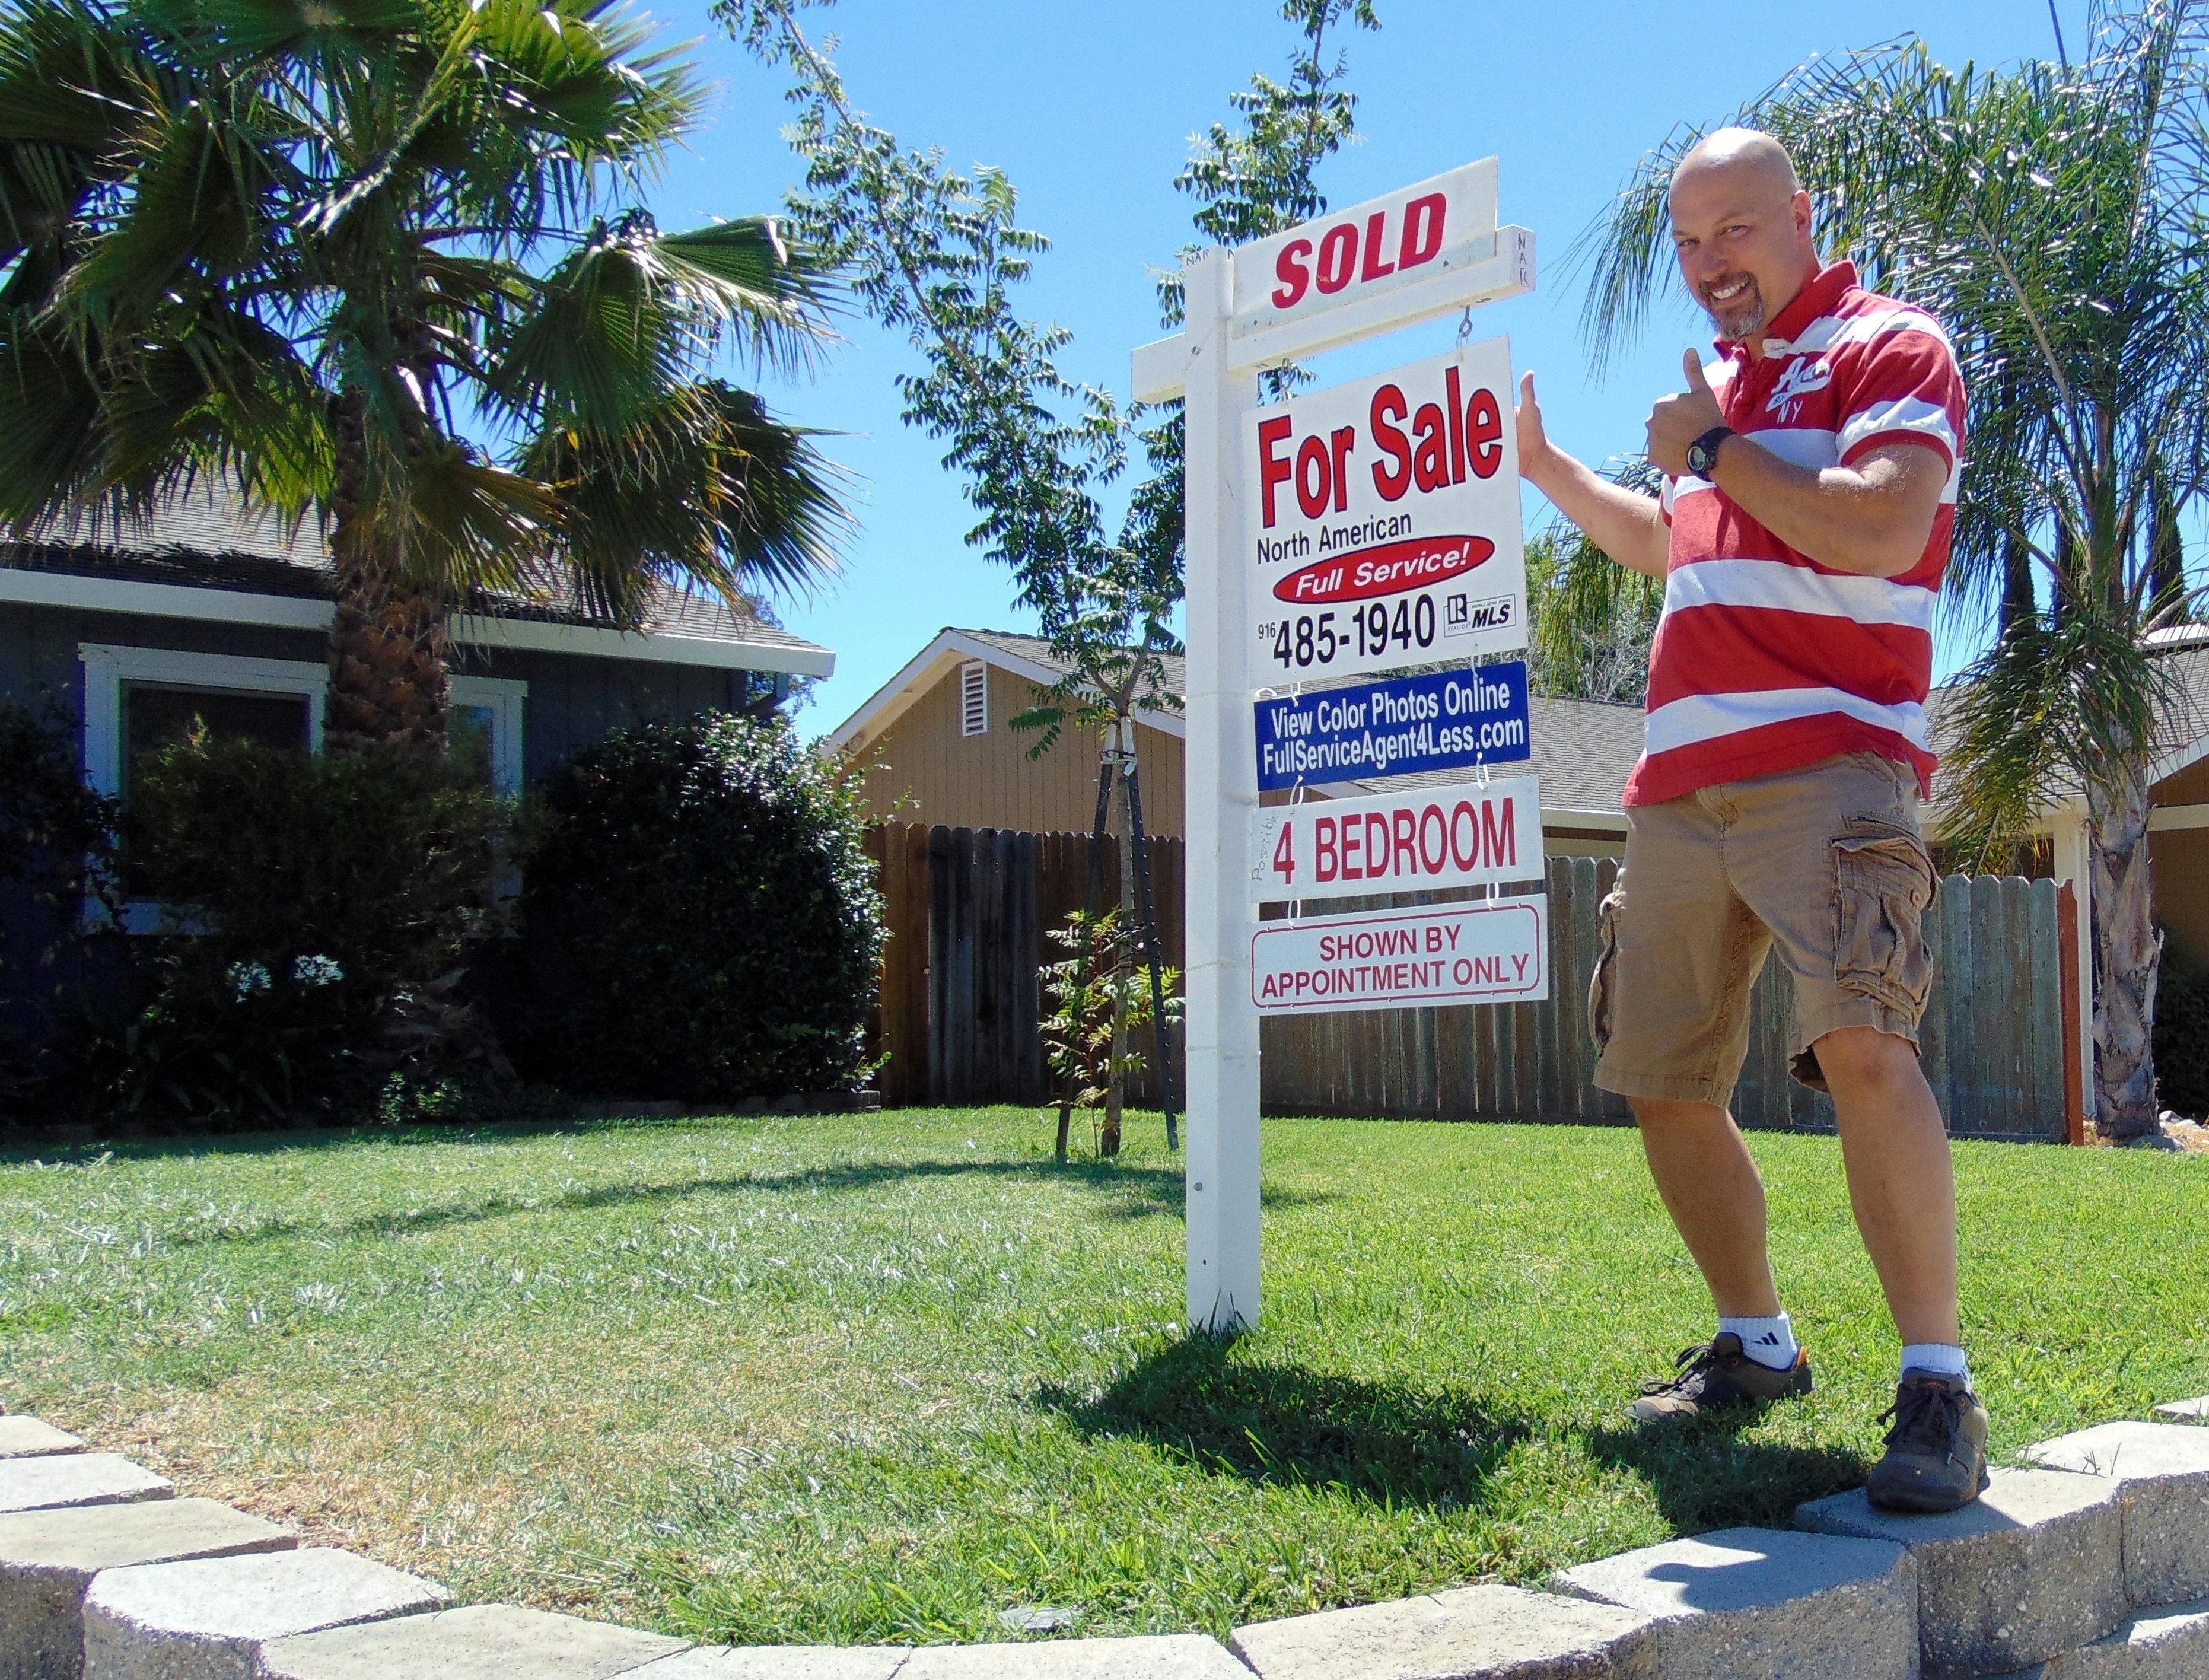 Seller standing outside his home next to our real estate for sale sign happy because the home is SOLD